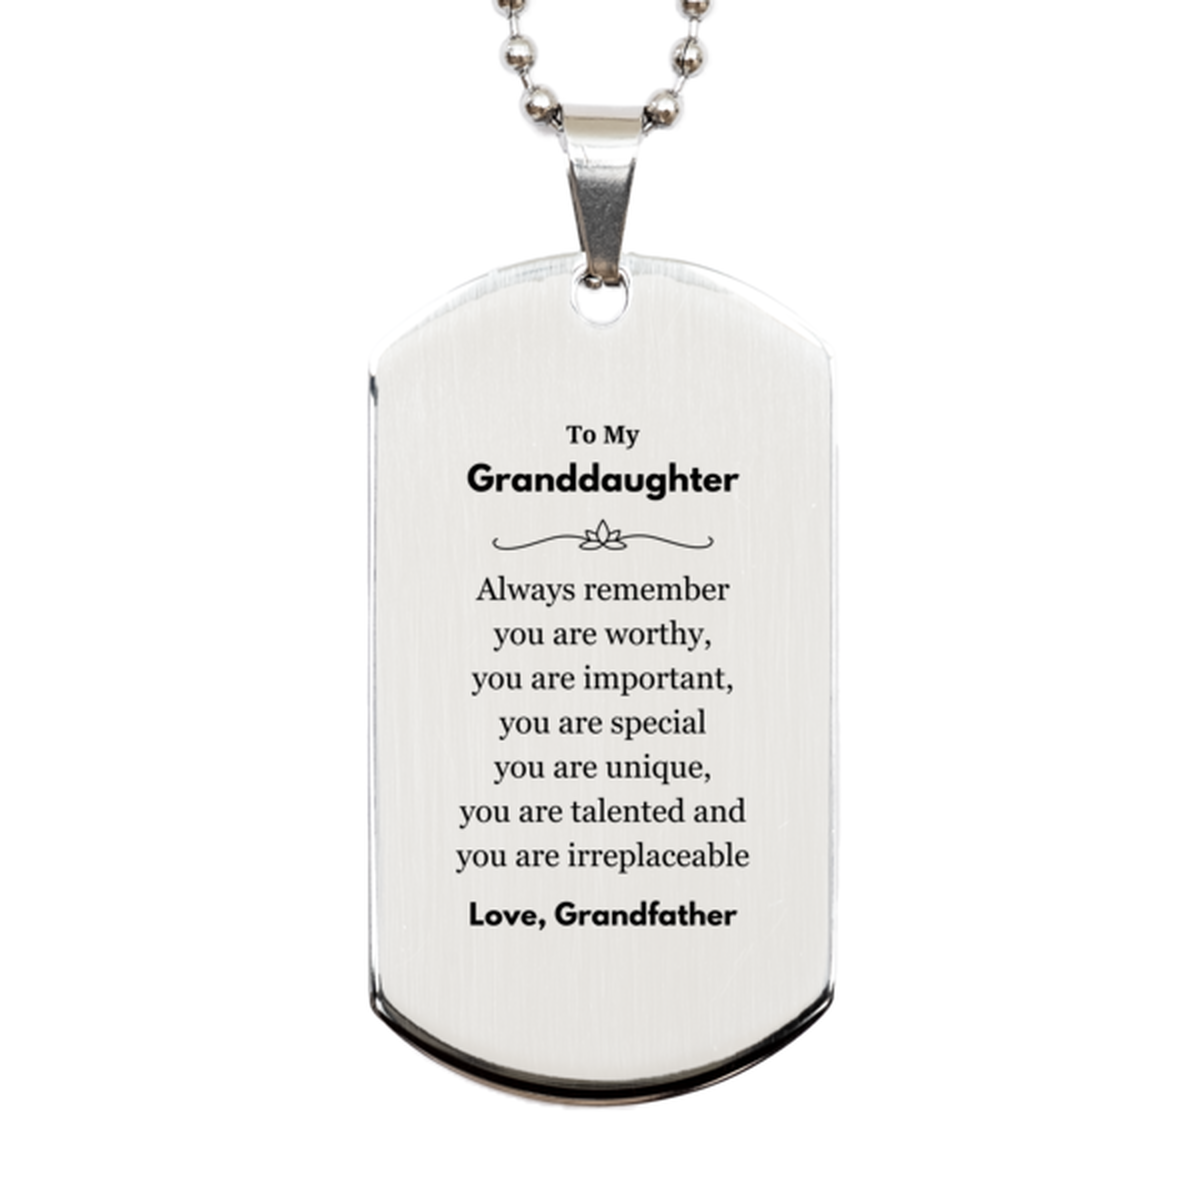 Granddaughter Birthday Gifts from Grandfather, Inspirational Silver Dog Tag for Granddaughter Christmas Graduation Gifts for Granddaughter Always remember you are worthy, you are important. Love, Grandfather